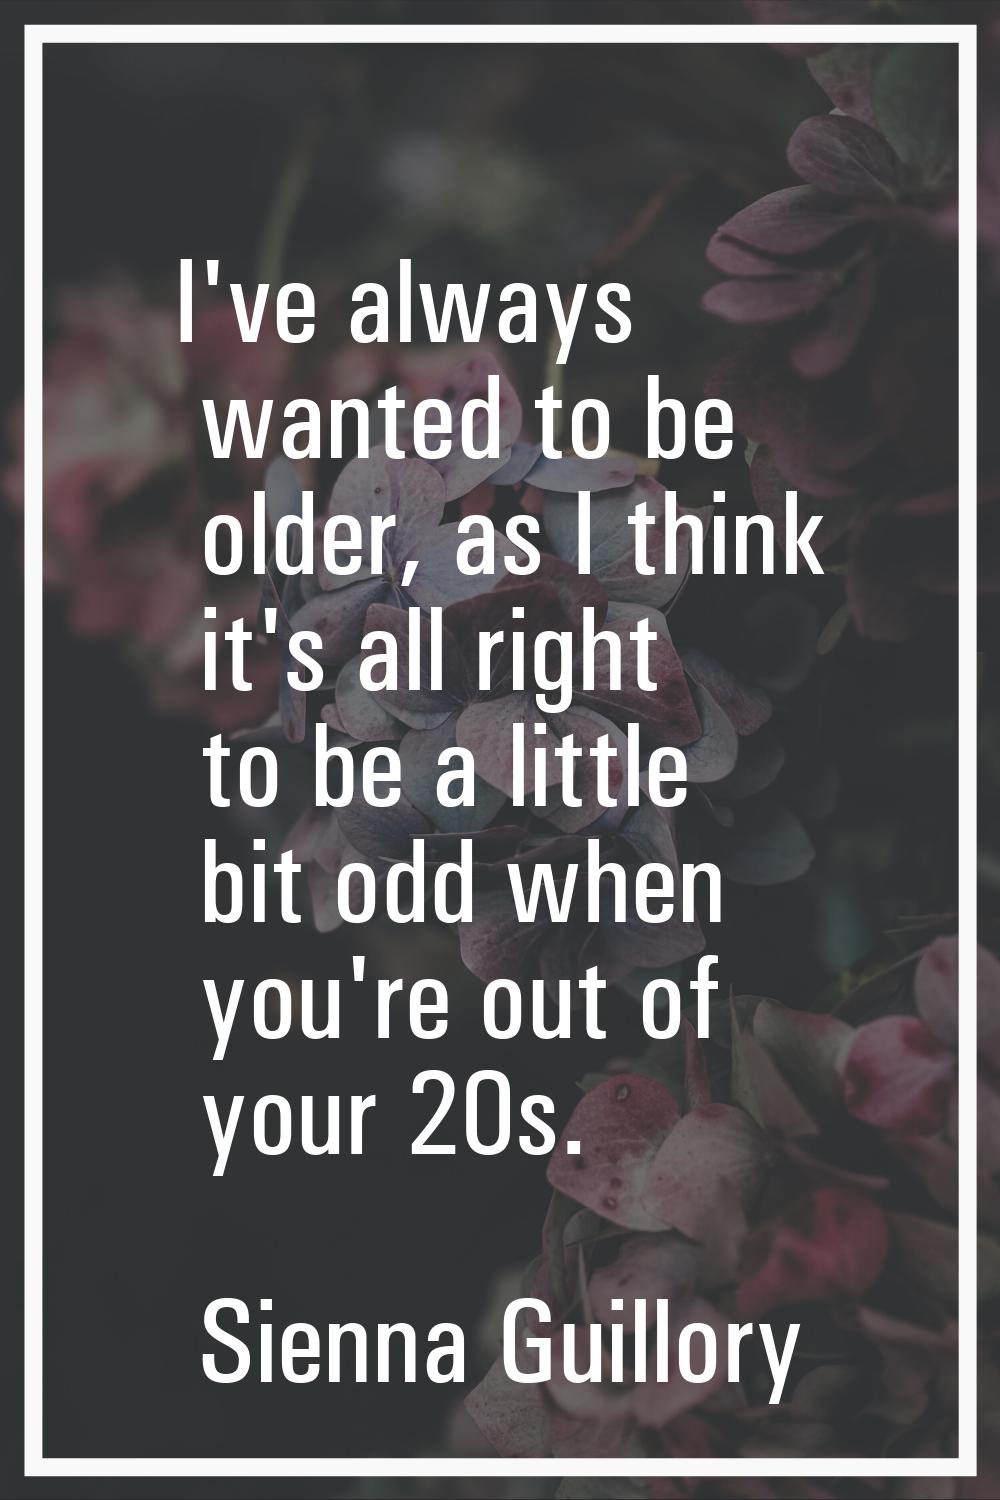 I've always wanted to be older, as I think it's all right to be a little bit odd when you're out of